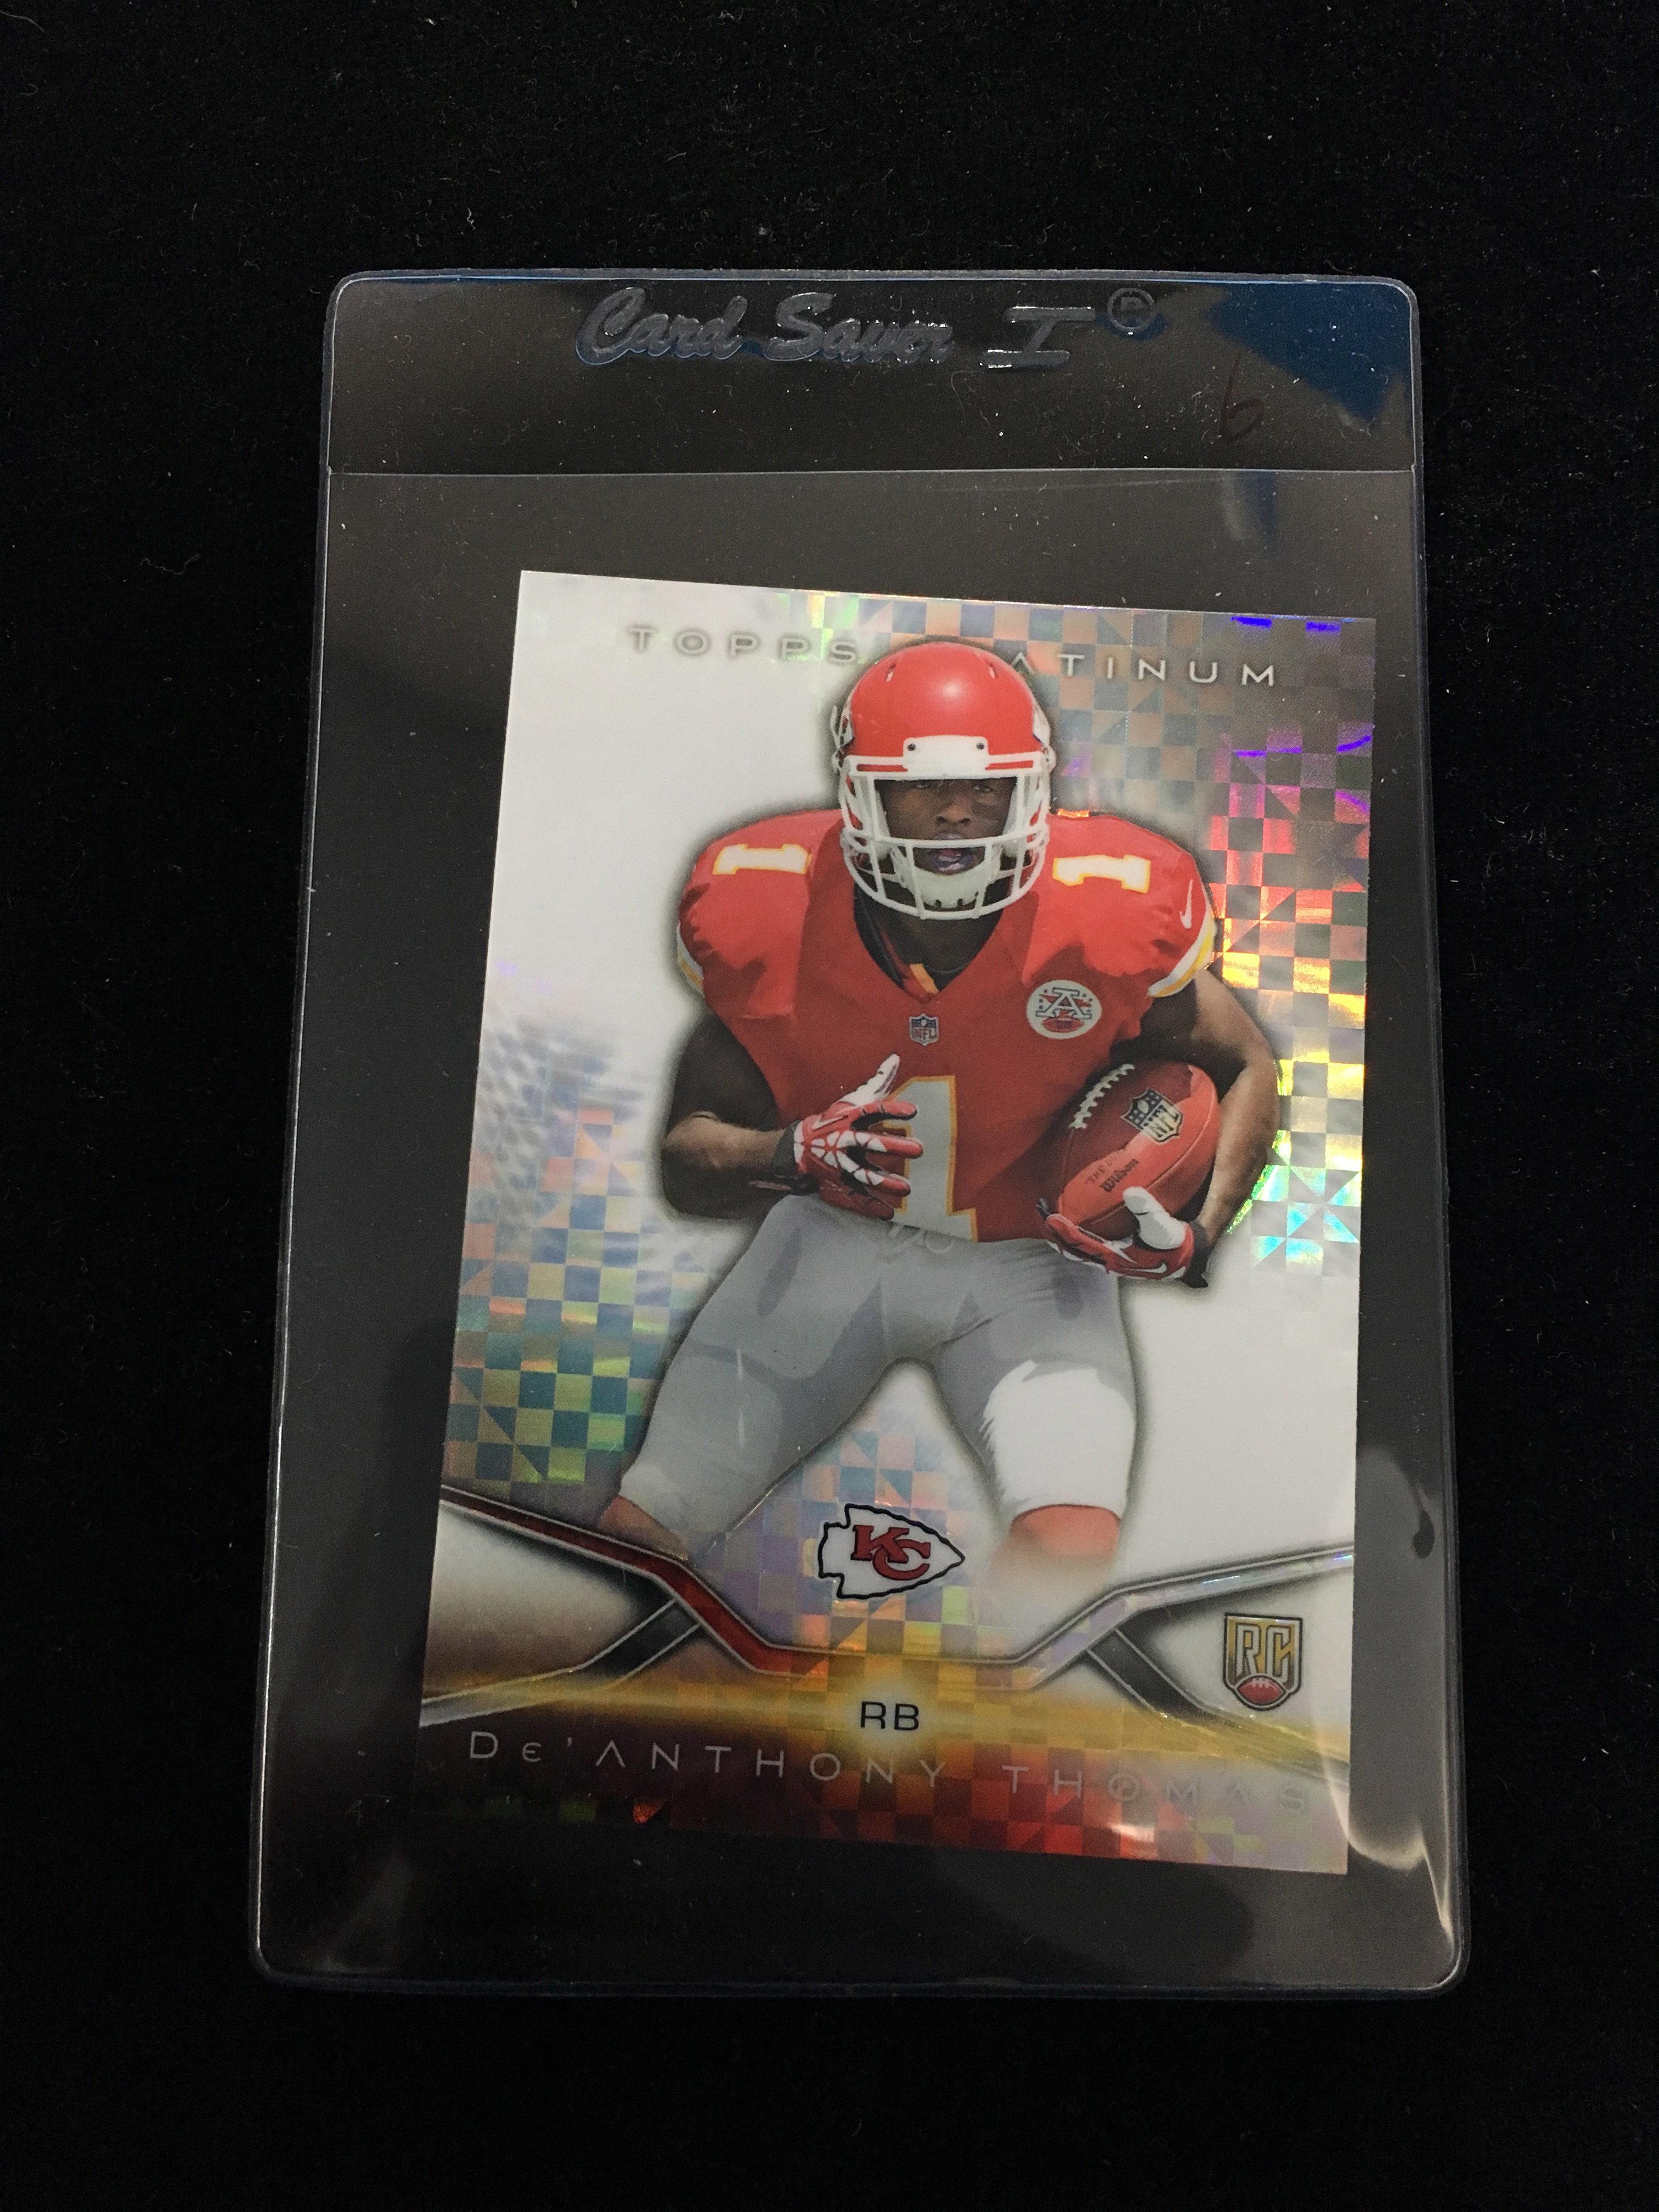 2015 Topps Platinum Xfractor DeAnthony Thomas Chiefs Rookie Football Card